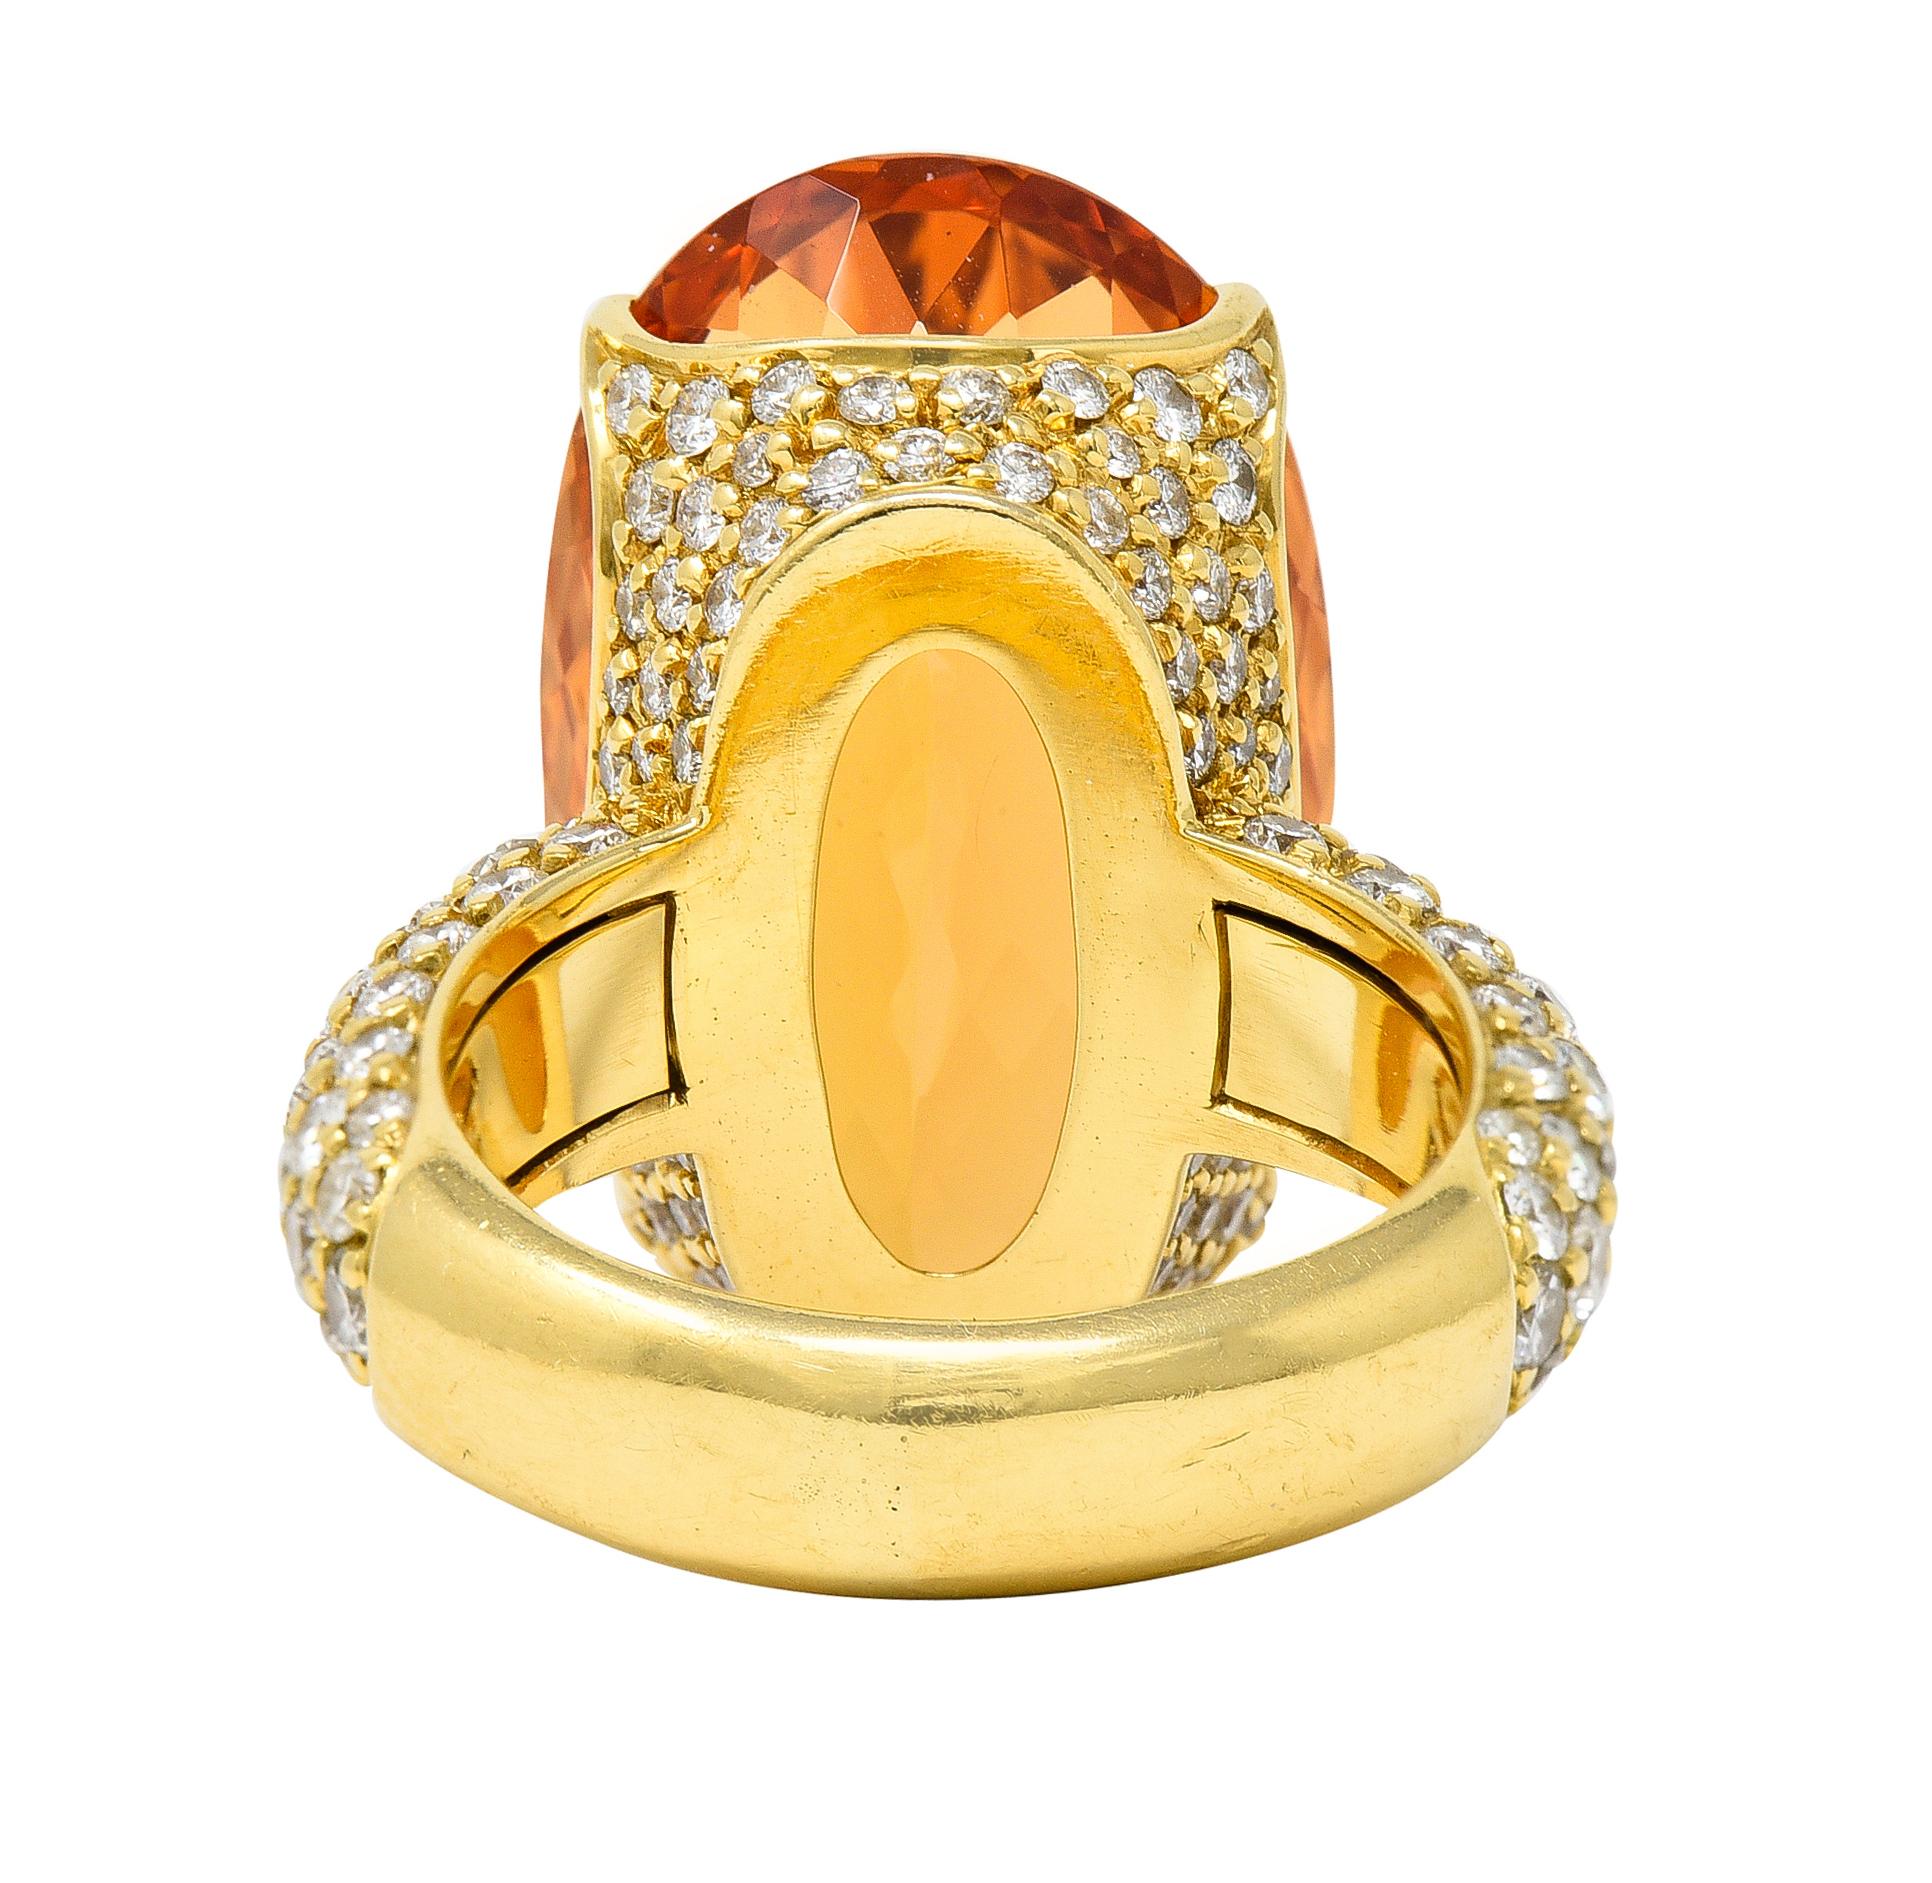 Oval Cut H. Stern 26.03 CTW Imperial Topaz Diamond 18 Karat Yellow Gold Cocktail Ring